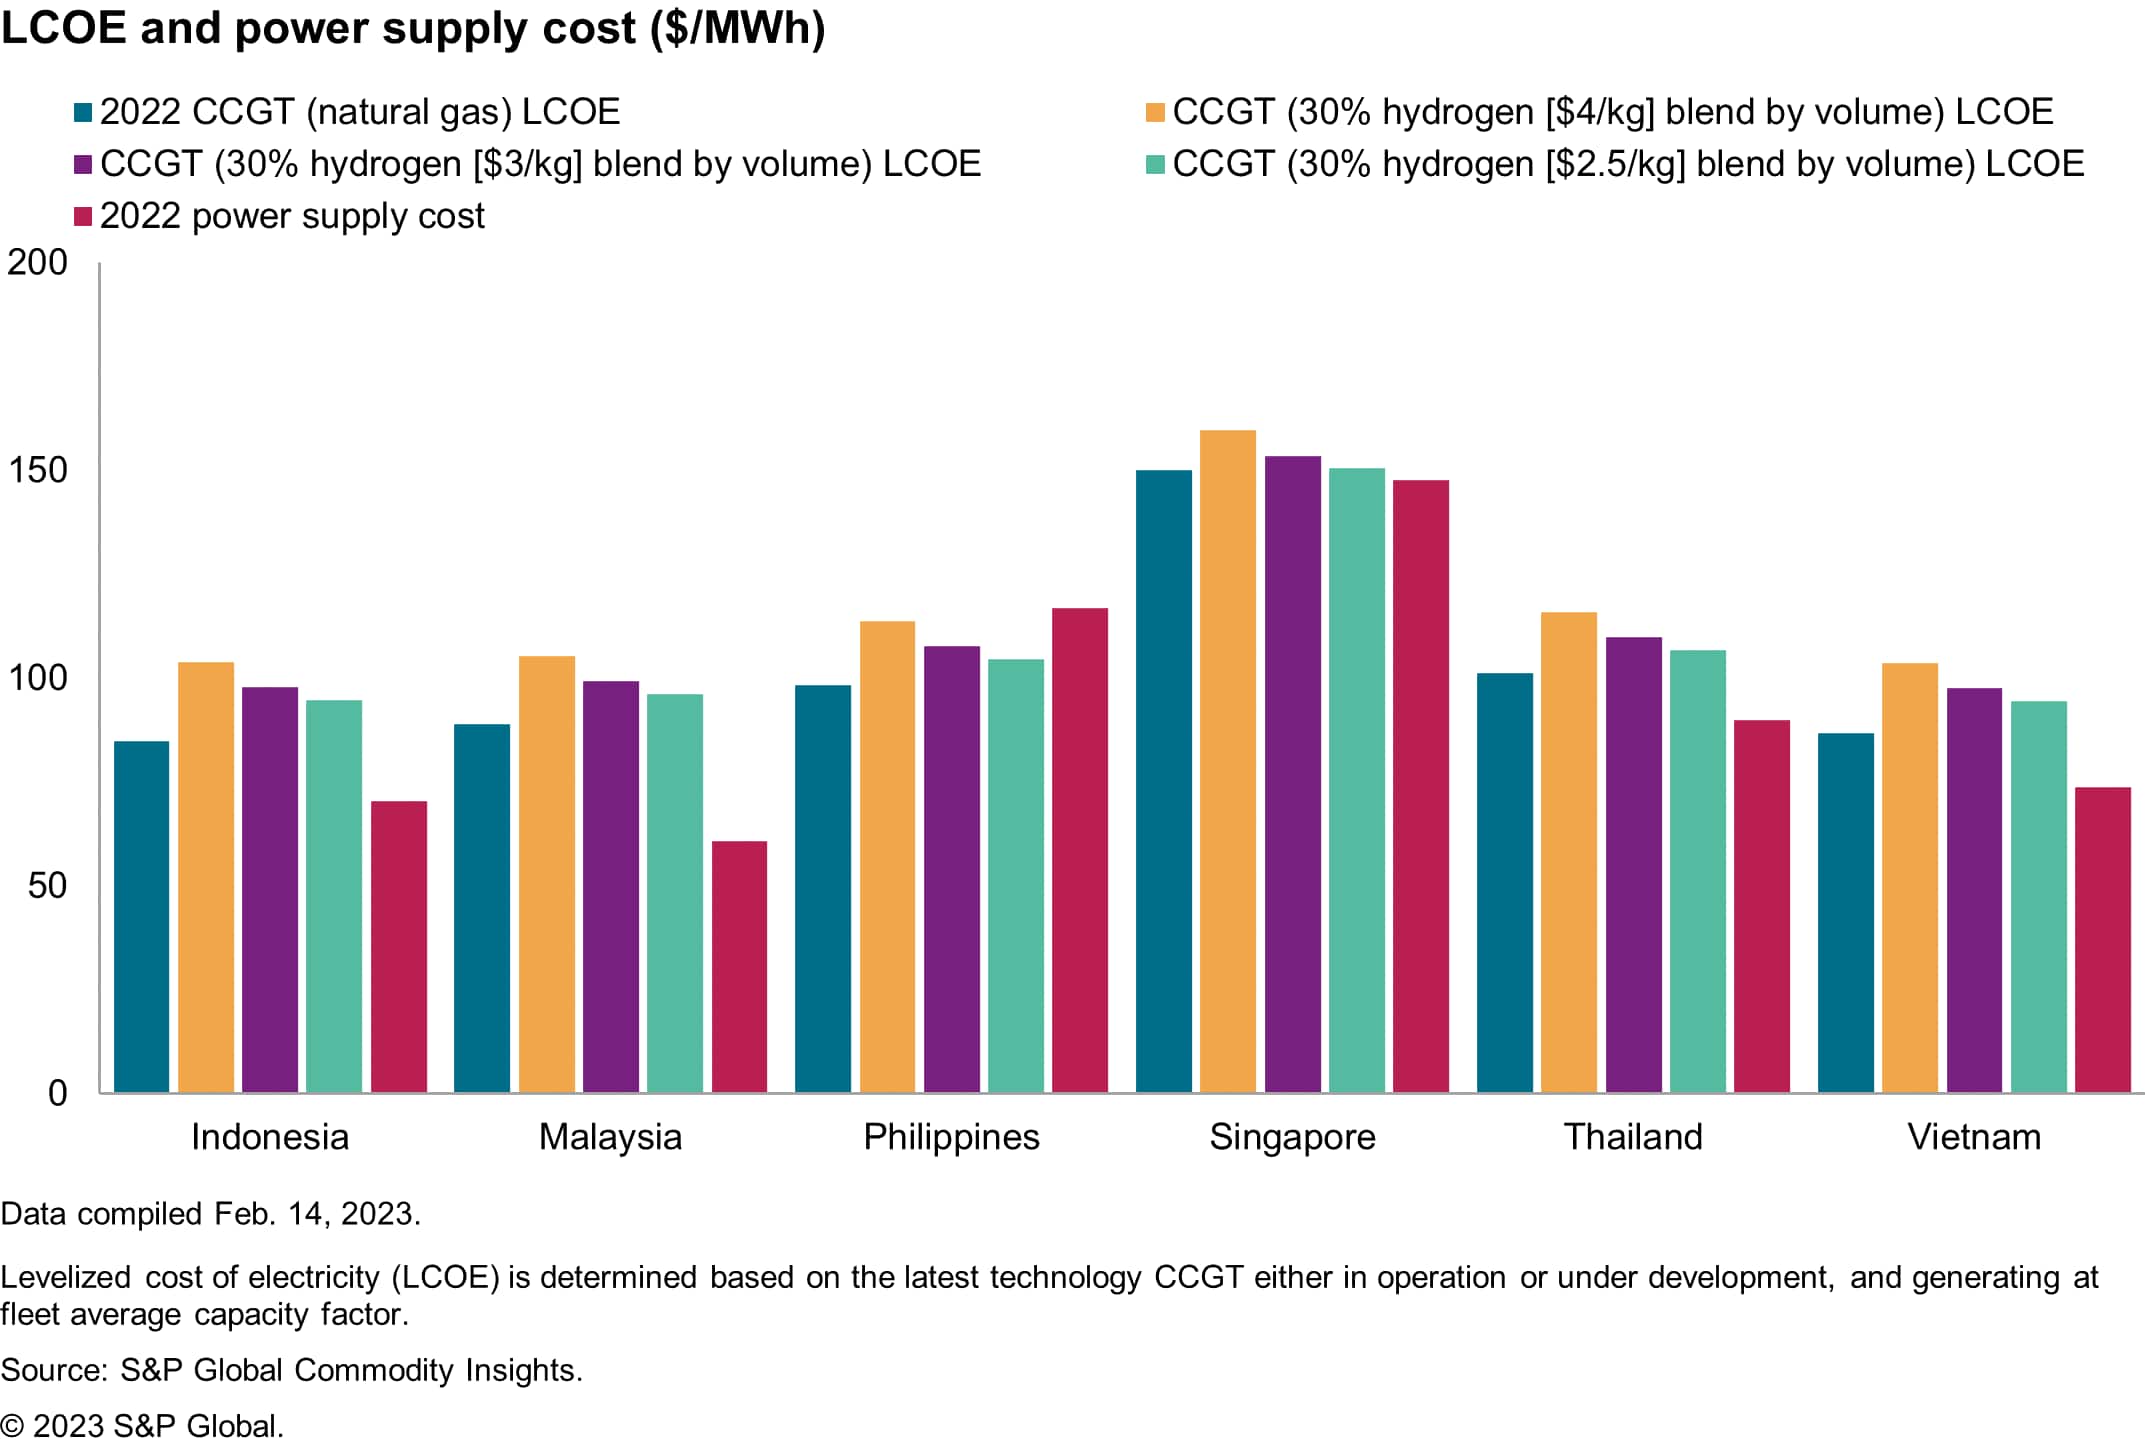 Levelized Cost of Electricity and power supply cost